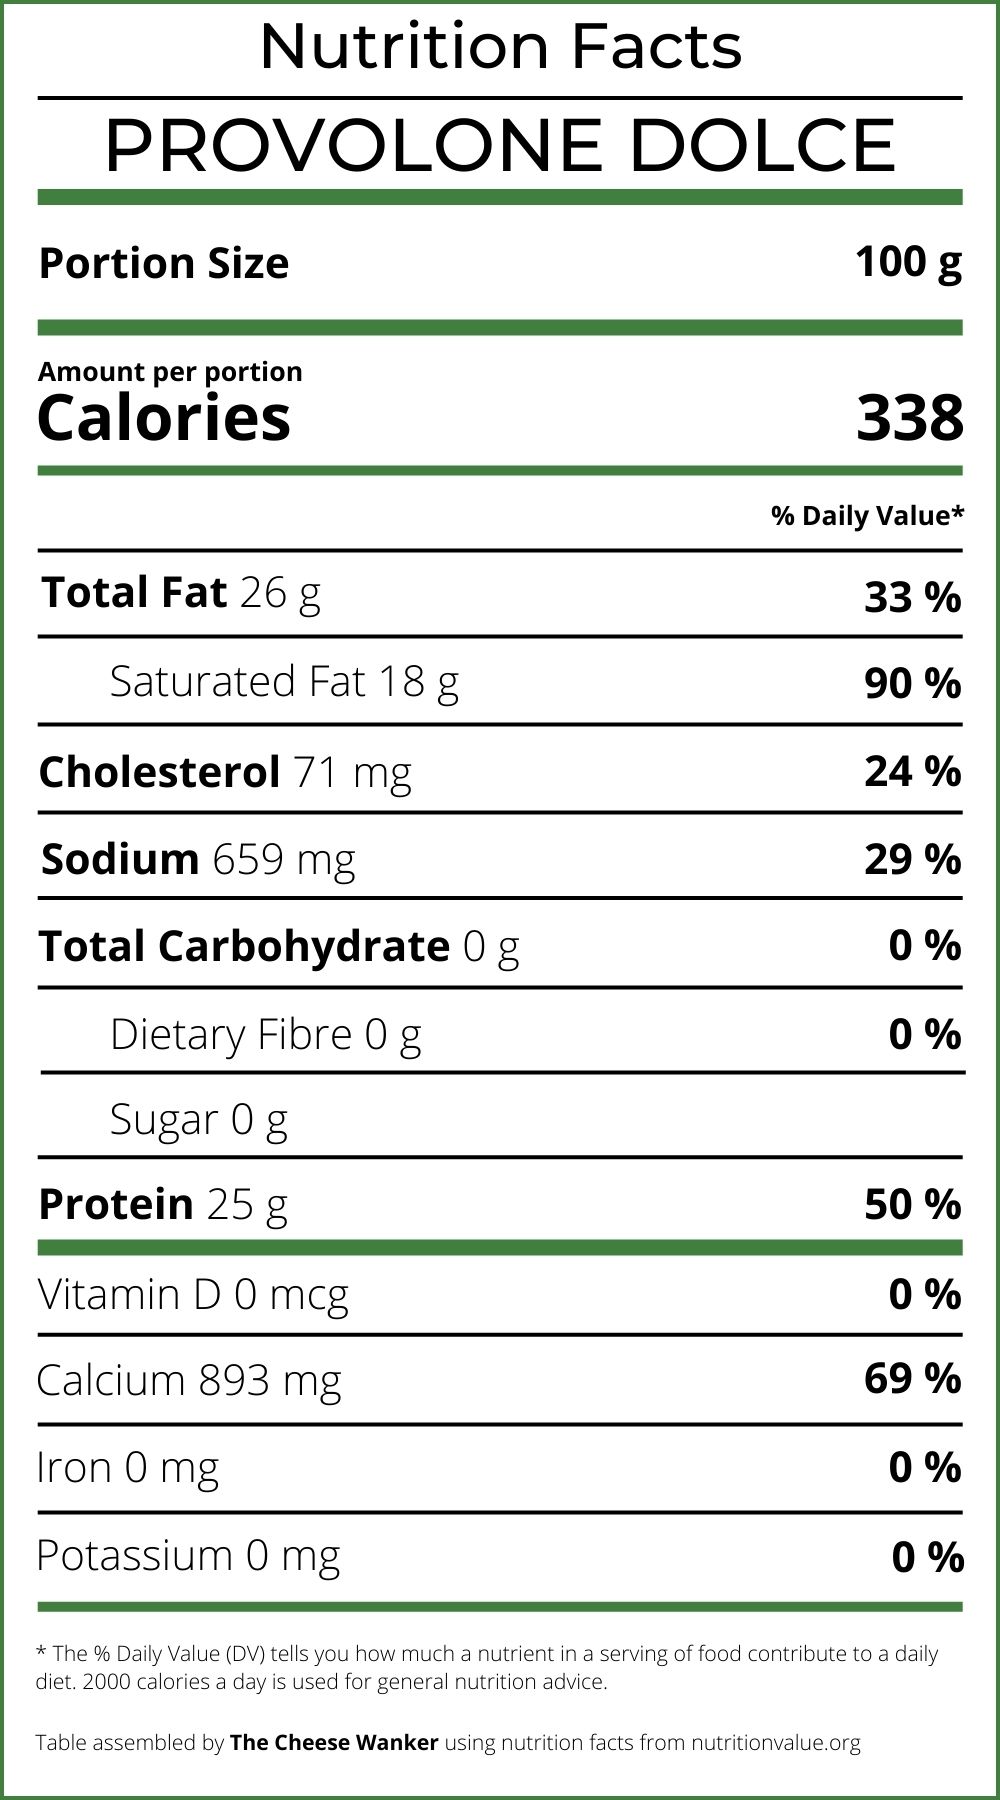 Provolone Dolce Nutrition Facts